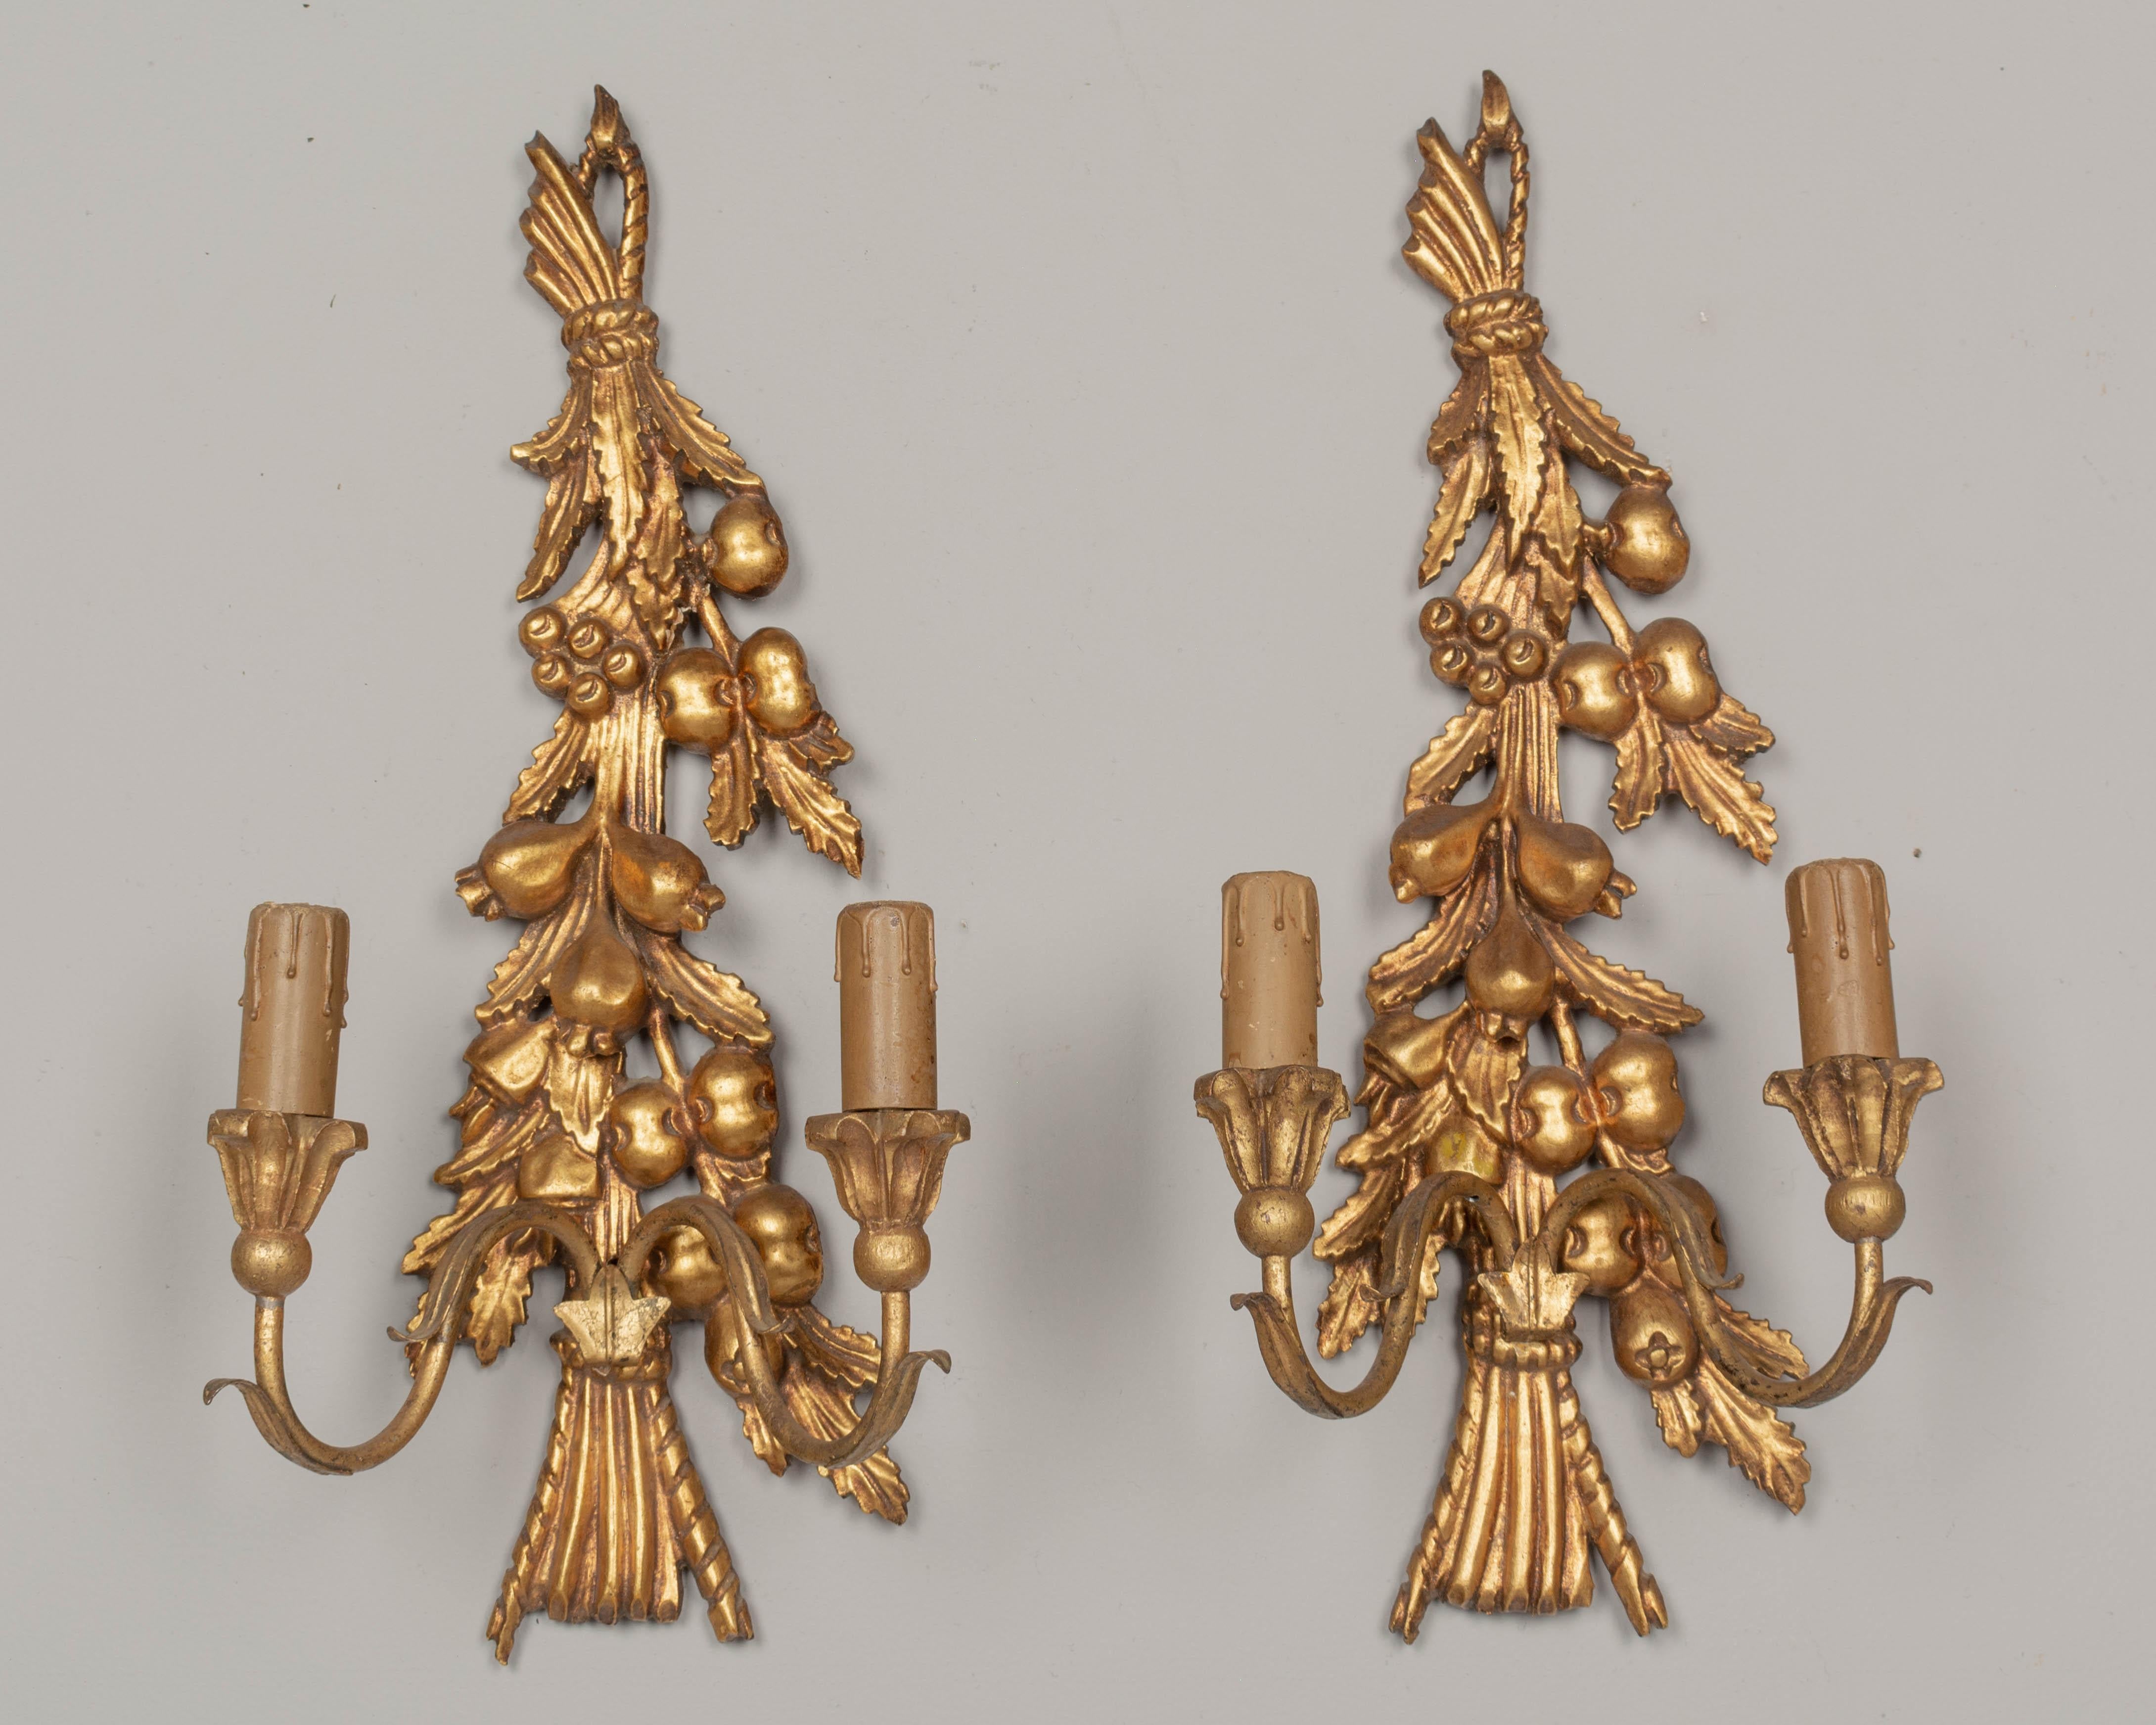 A pair of Italian two-light carved and gilded sconces with tole leaves. Nice three dimensional detail of pomegranate fruits and leaves. In good condition with bright gilt. Original candle covers. Rewired with new sockets. Minor restoration.
 